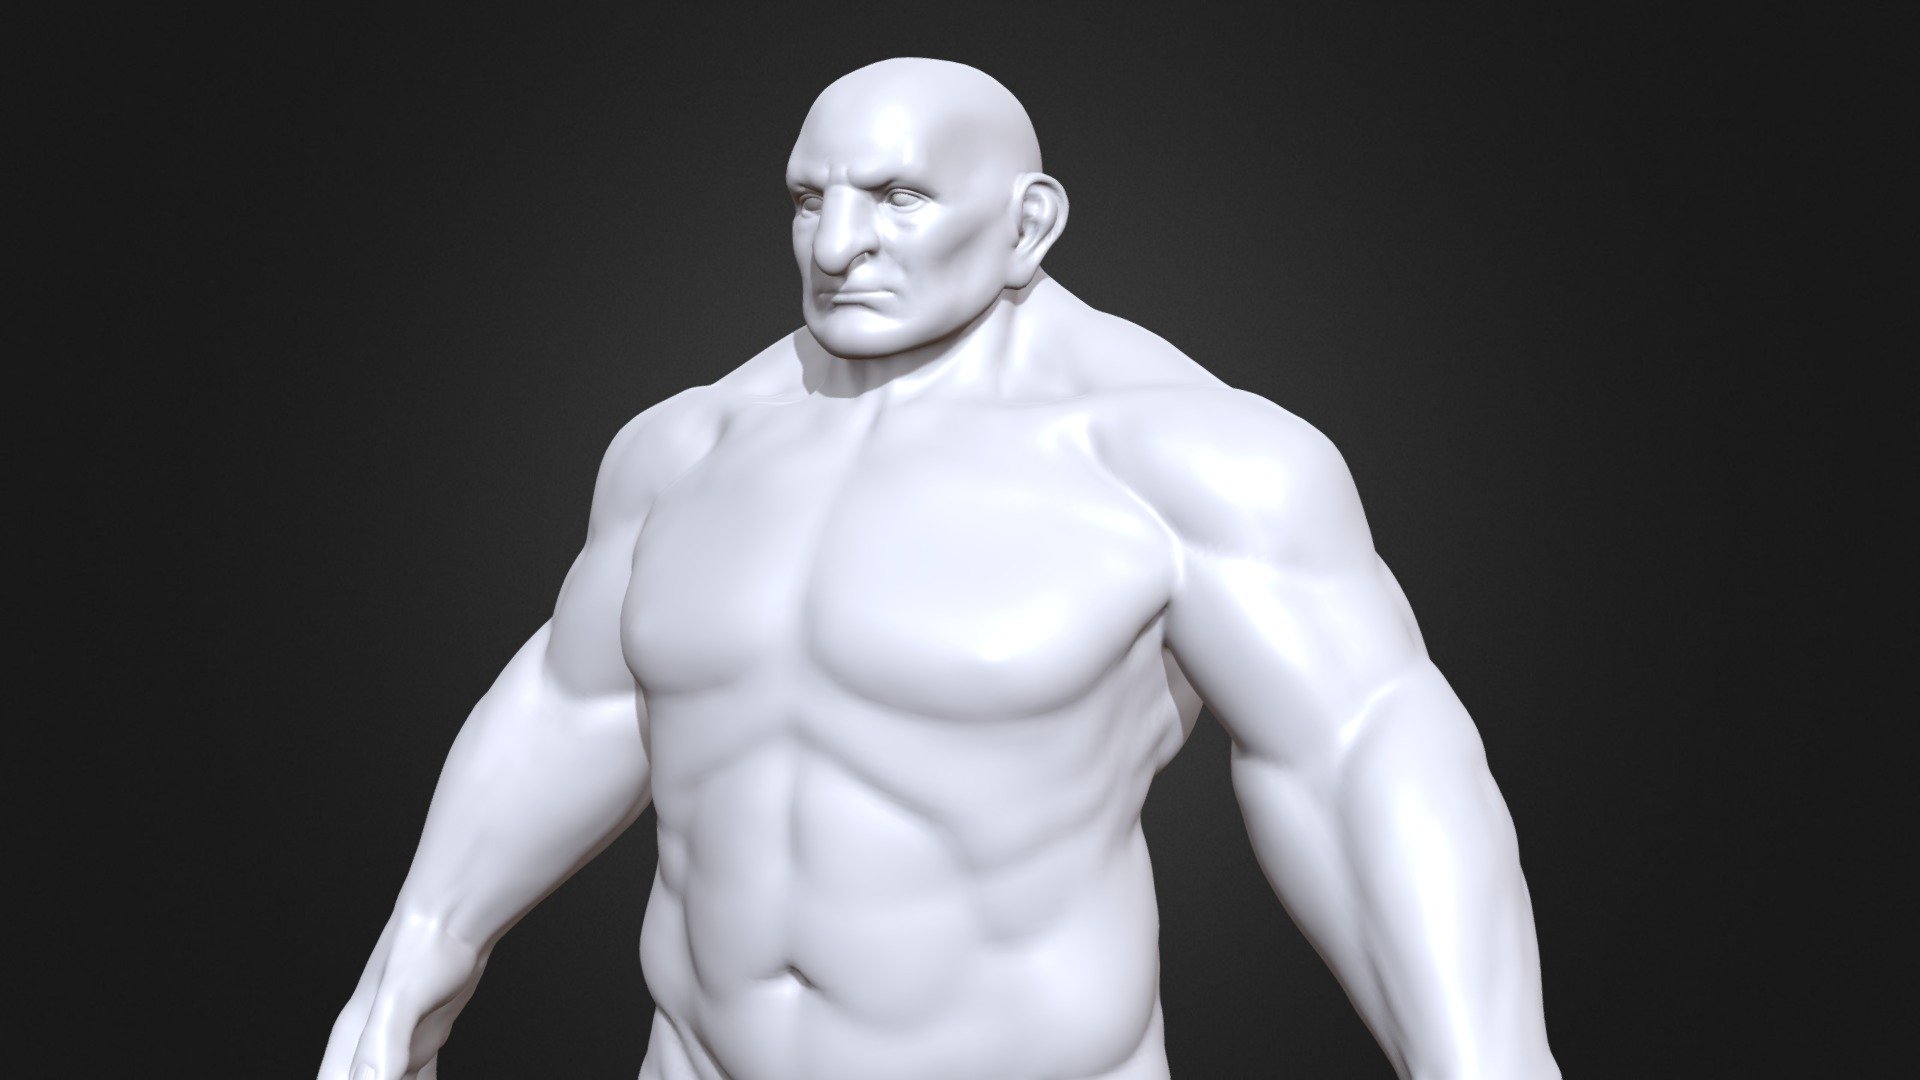 A base mesh file for a male adult fantasy dwarf. The model uses quad topology for better subdivisions and is suited for a multiresolution workflow. Intended for use as reference or to as a base for further sculpting and modelling. There are two versions of the file, one with the original topolgy (as seen on the wireframes pictures) and a second one with one level of subdivision and further defining of some of the forms, which is the one displayed in here. 

The model is NOT rigged or UV unwrapped.

The original topology for the body is 34k triangles/17k faces. The files also include an eyeball and nails meshes, totalling 50k triangles 3d model